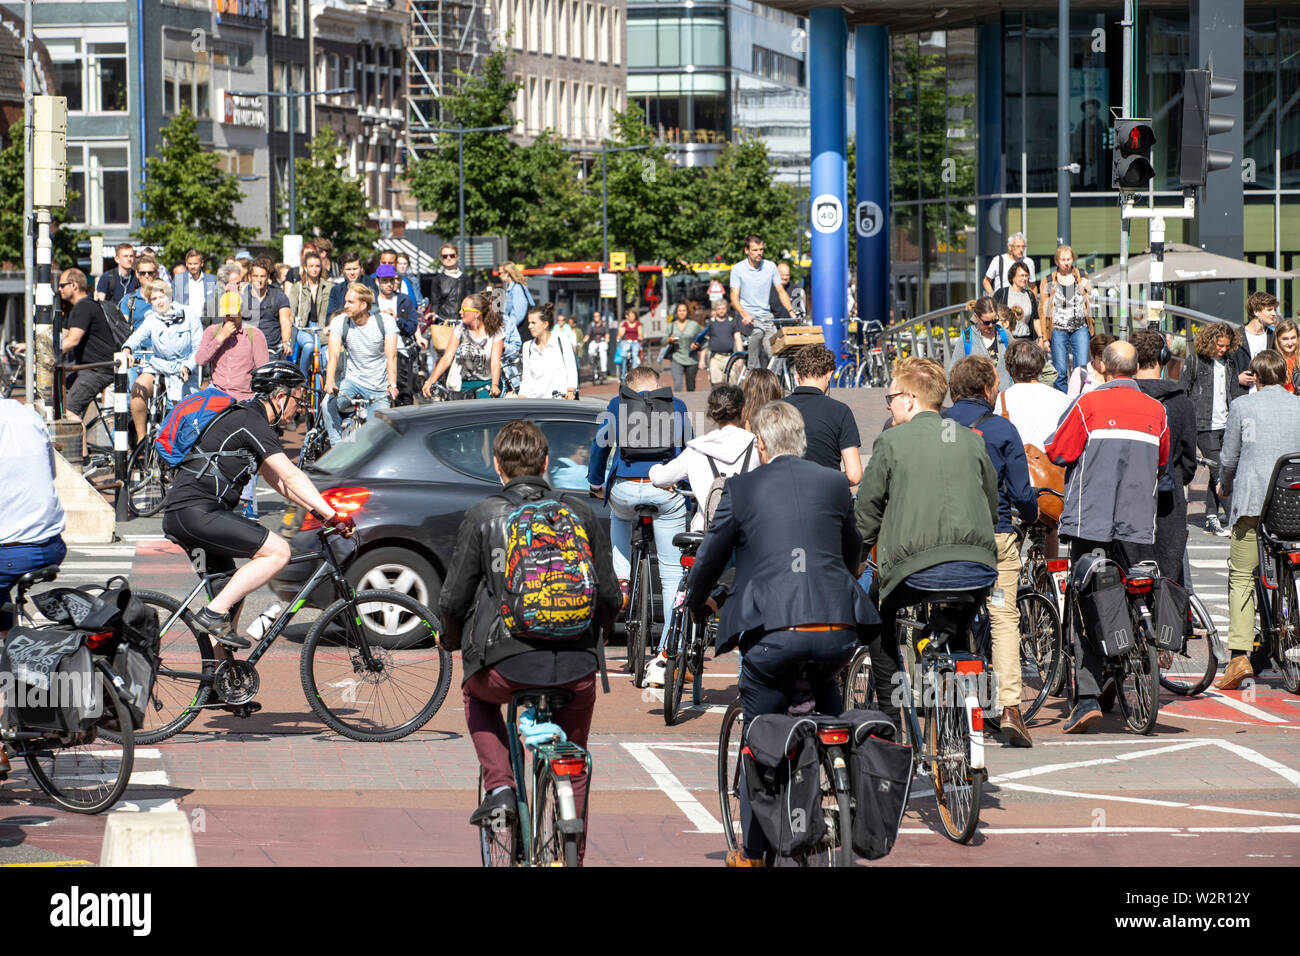 Manieren Aquarium Ellendig Utrecht, Netherlands, bicycle traffic in the city center, 60% of Utrecht  citizens travel by bike into the city, inner city cycle path, bike path, cy  Stock Photo - Alamy